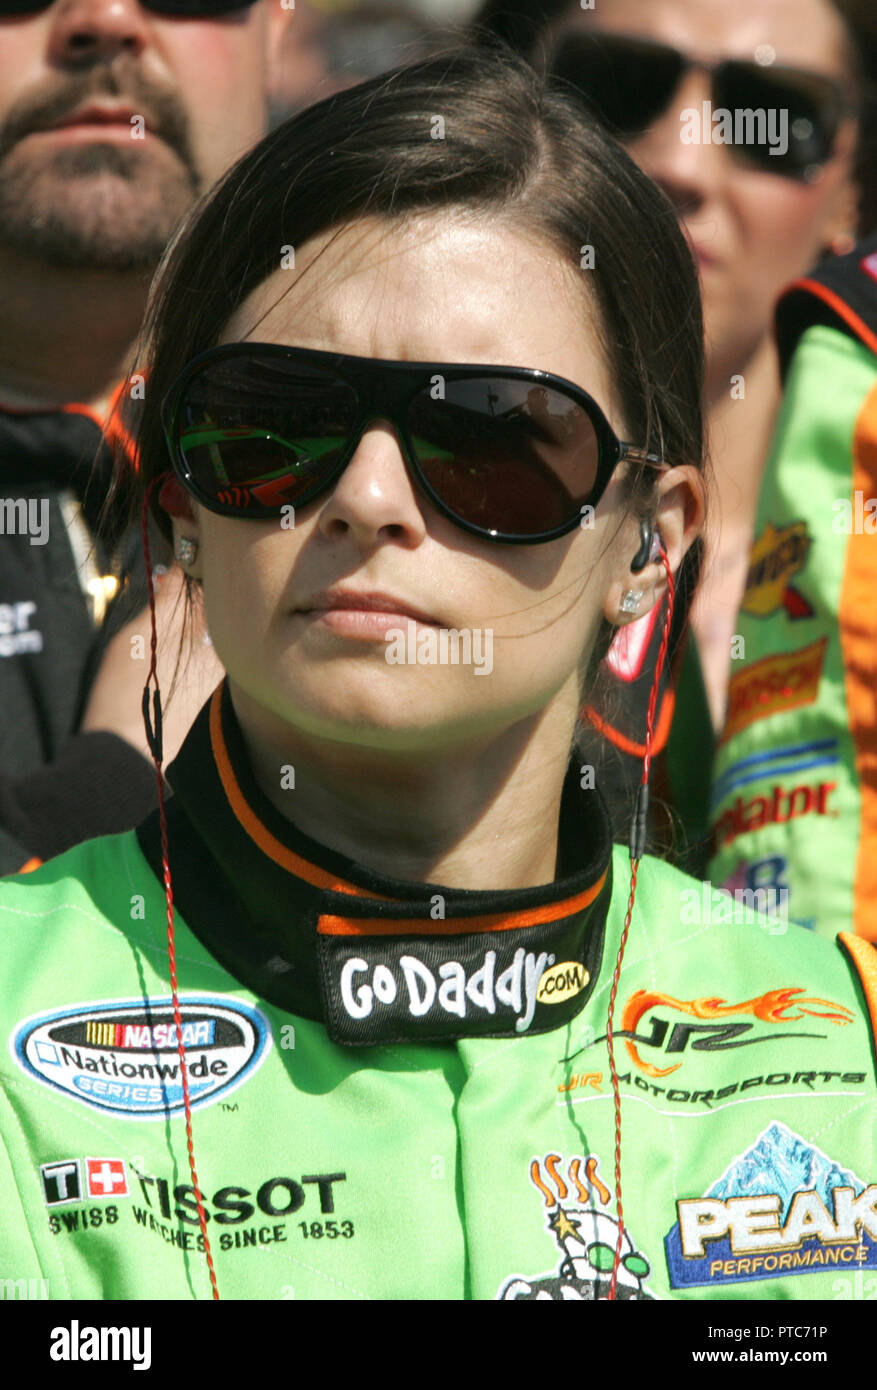 Danica Patrick waits by her car on pit road just prior to the start of the NASCAR Nationwide Drive4COPD 300 at Daytona International Speedway in Daytona Beach, Florida on February 19, 2011. Stock Photo